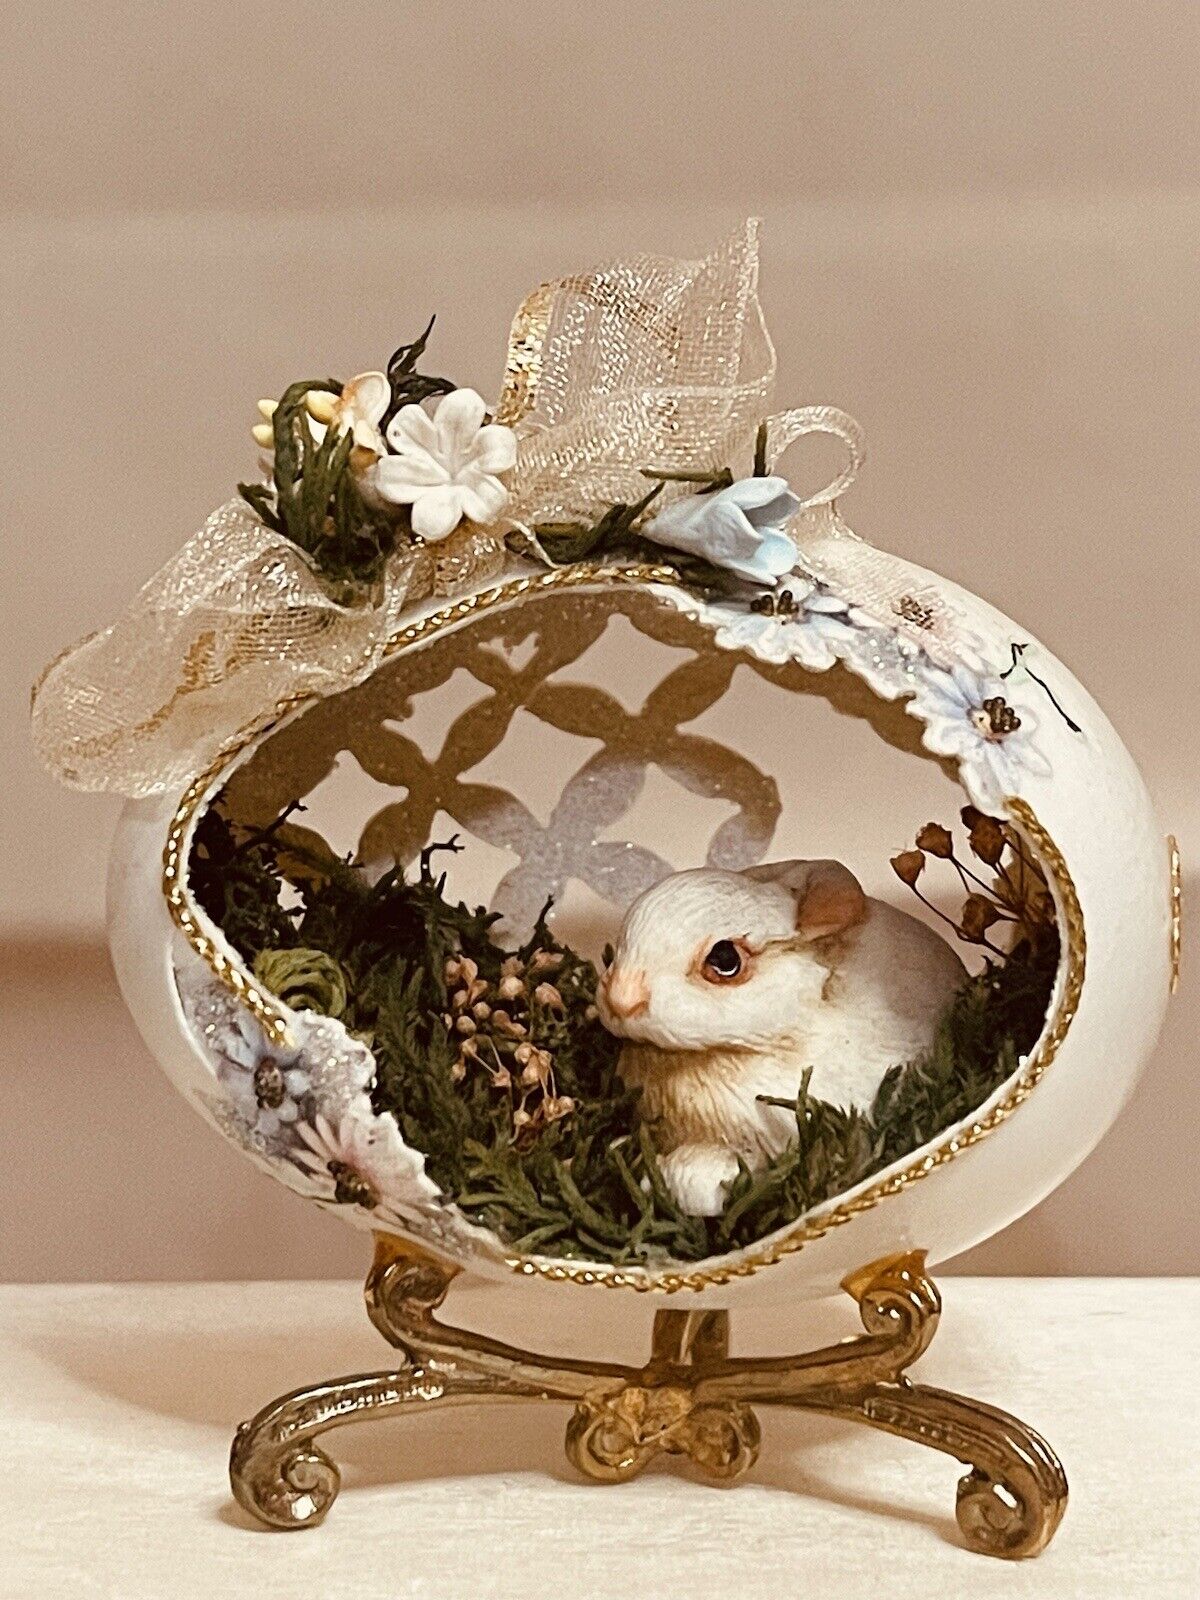 Vintage Hollowed Out Elegant Egg Springtime Bunny Scene Hand Crafted with Stand